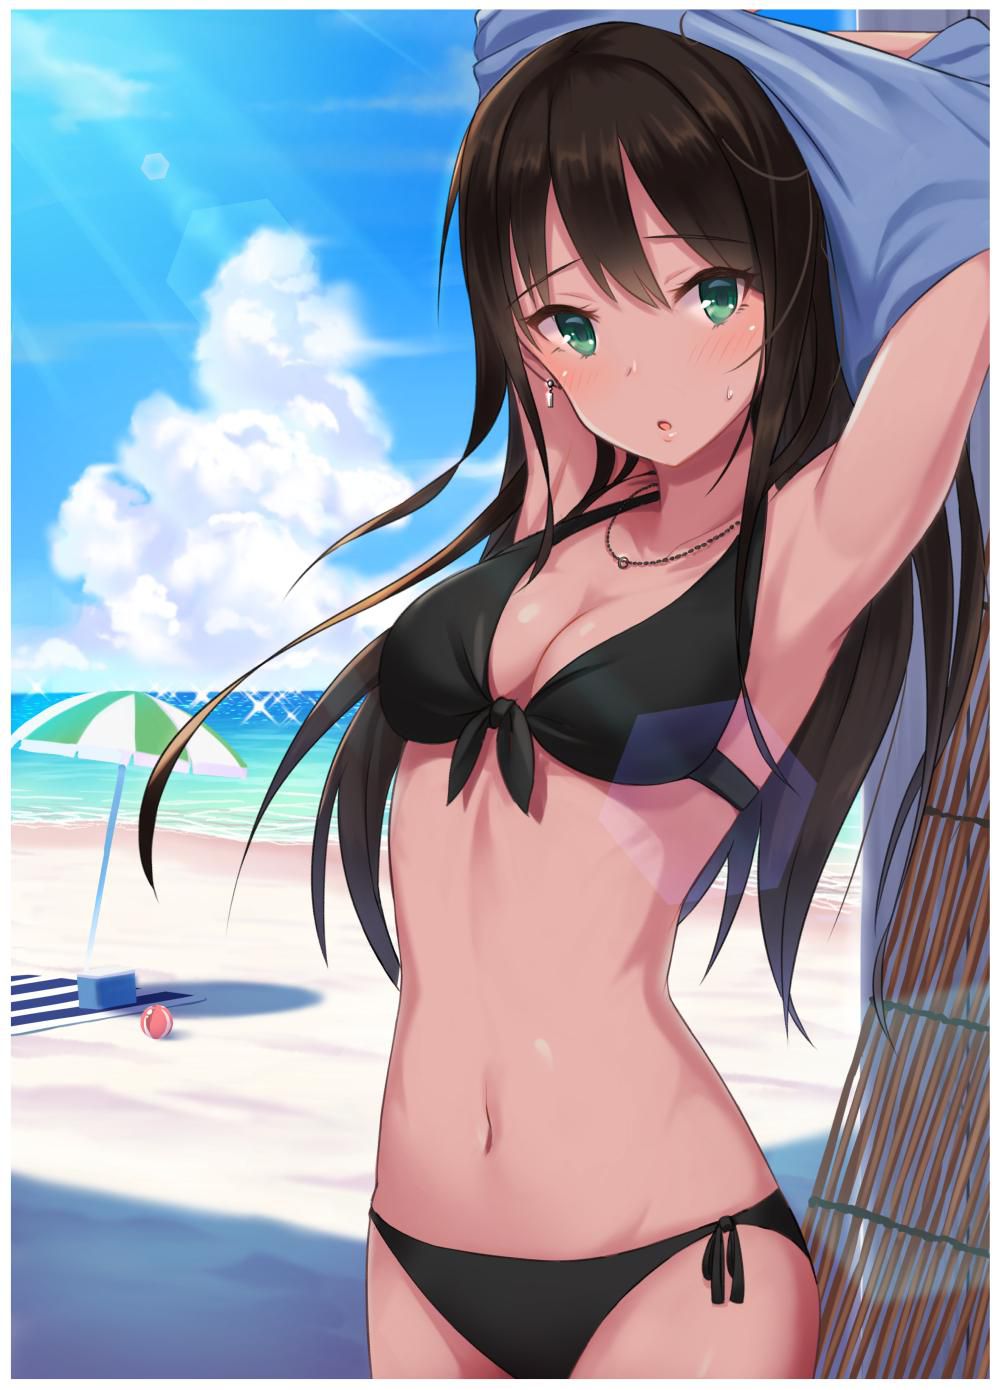 Swimsuit I want to see the image of swimsuit I'm a lewd I'm I'm that cloth area 12